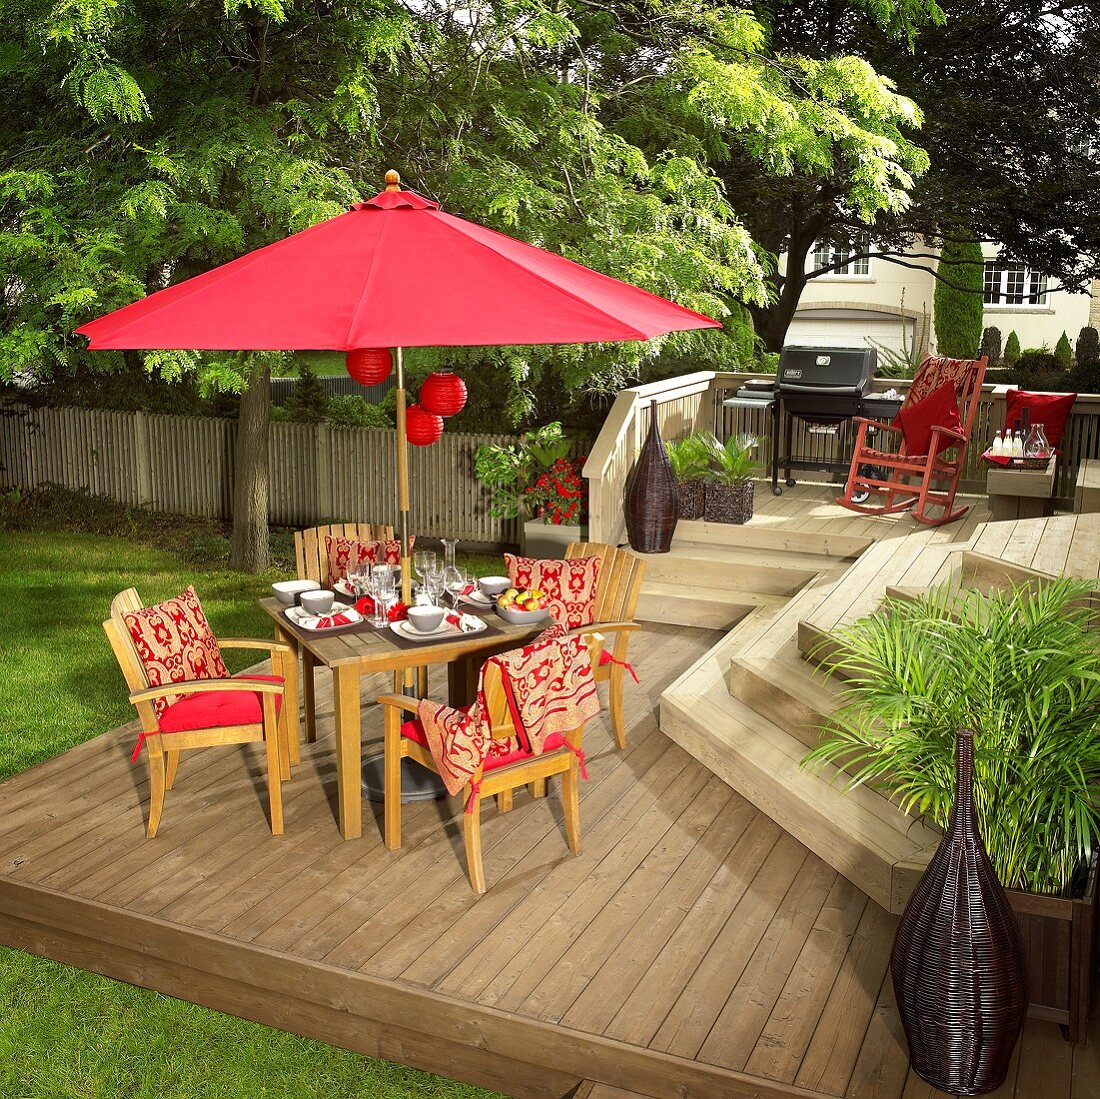 Laid table with red sun shade on decking